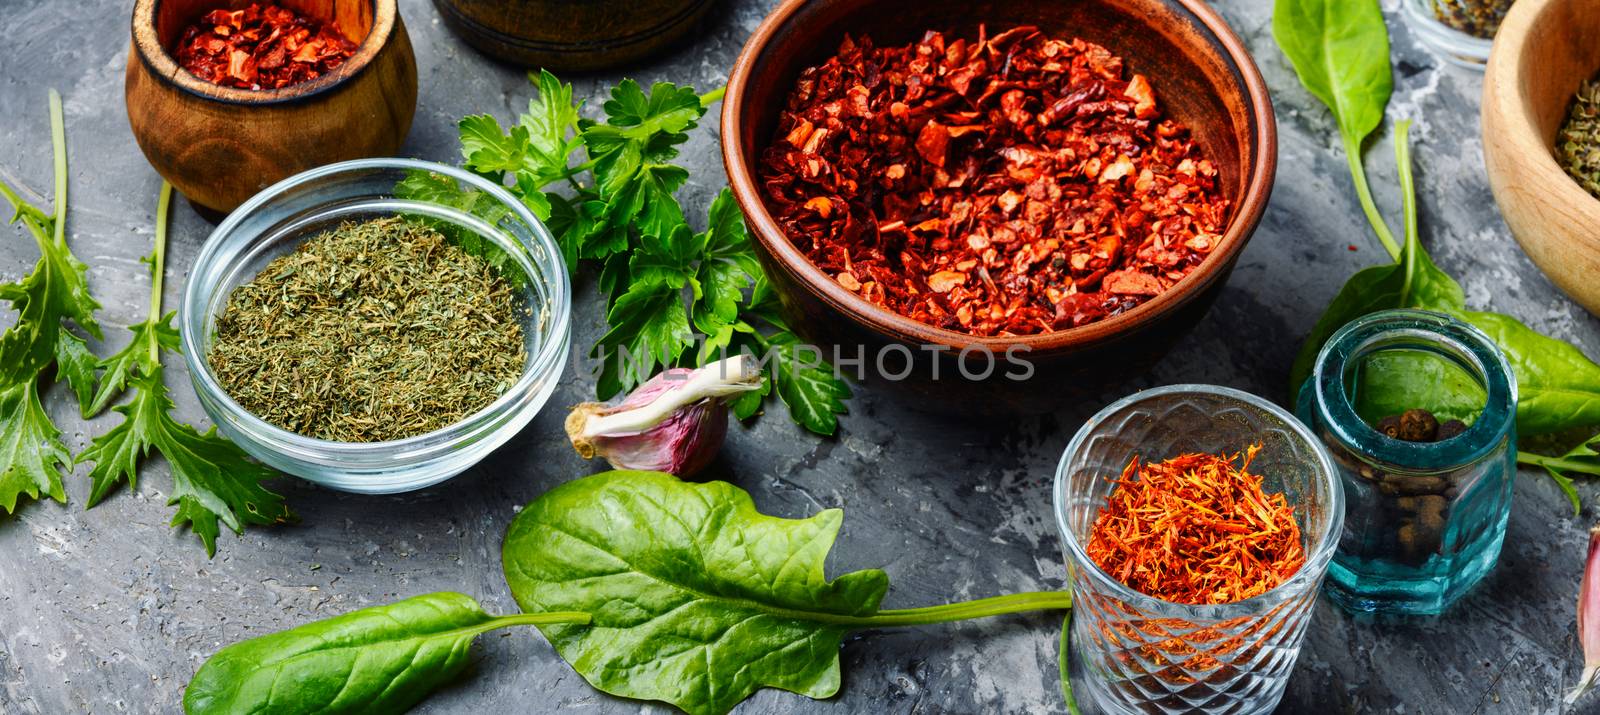 Aromatic spices and herbs by LMykola